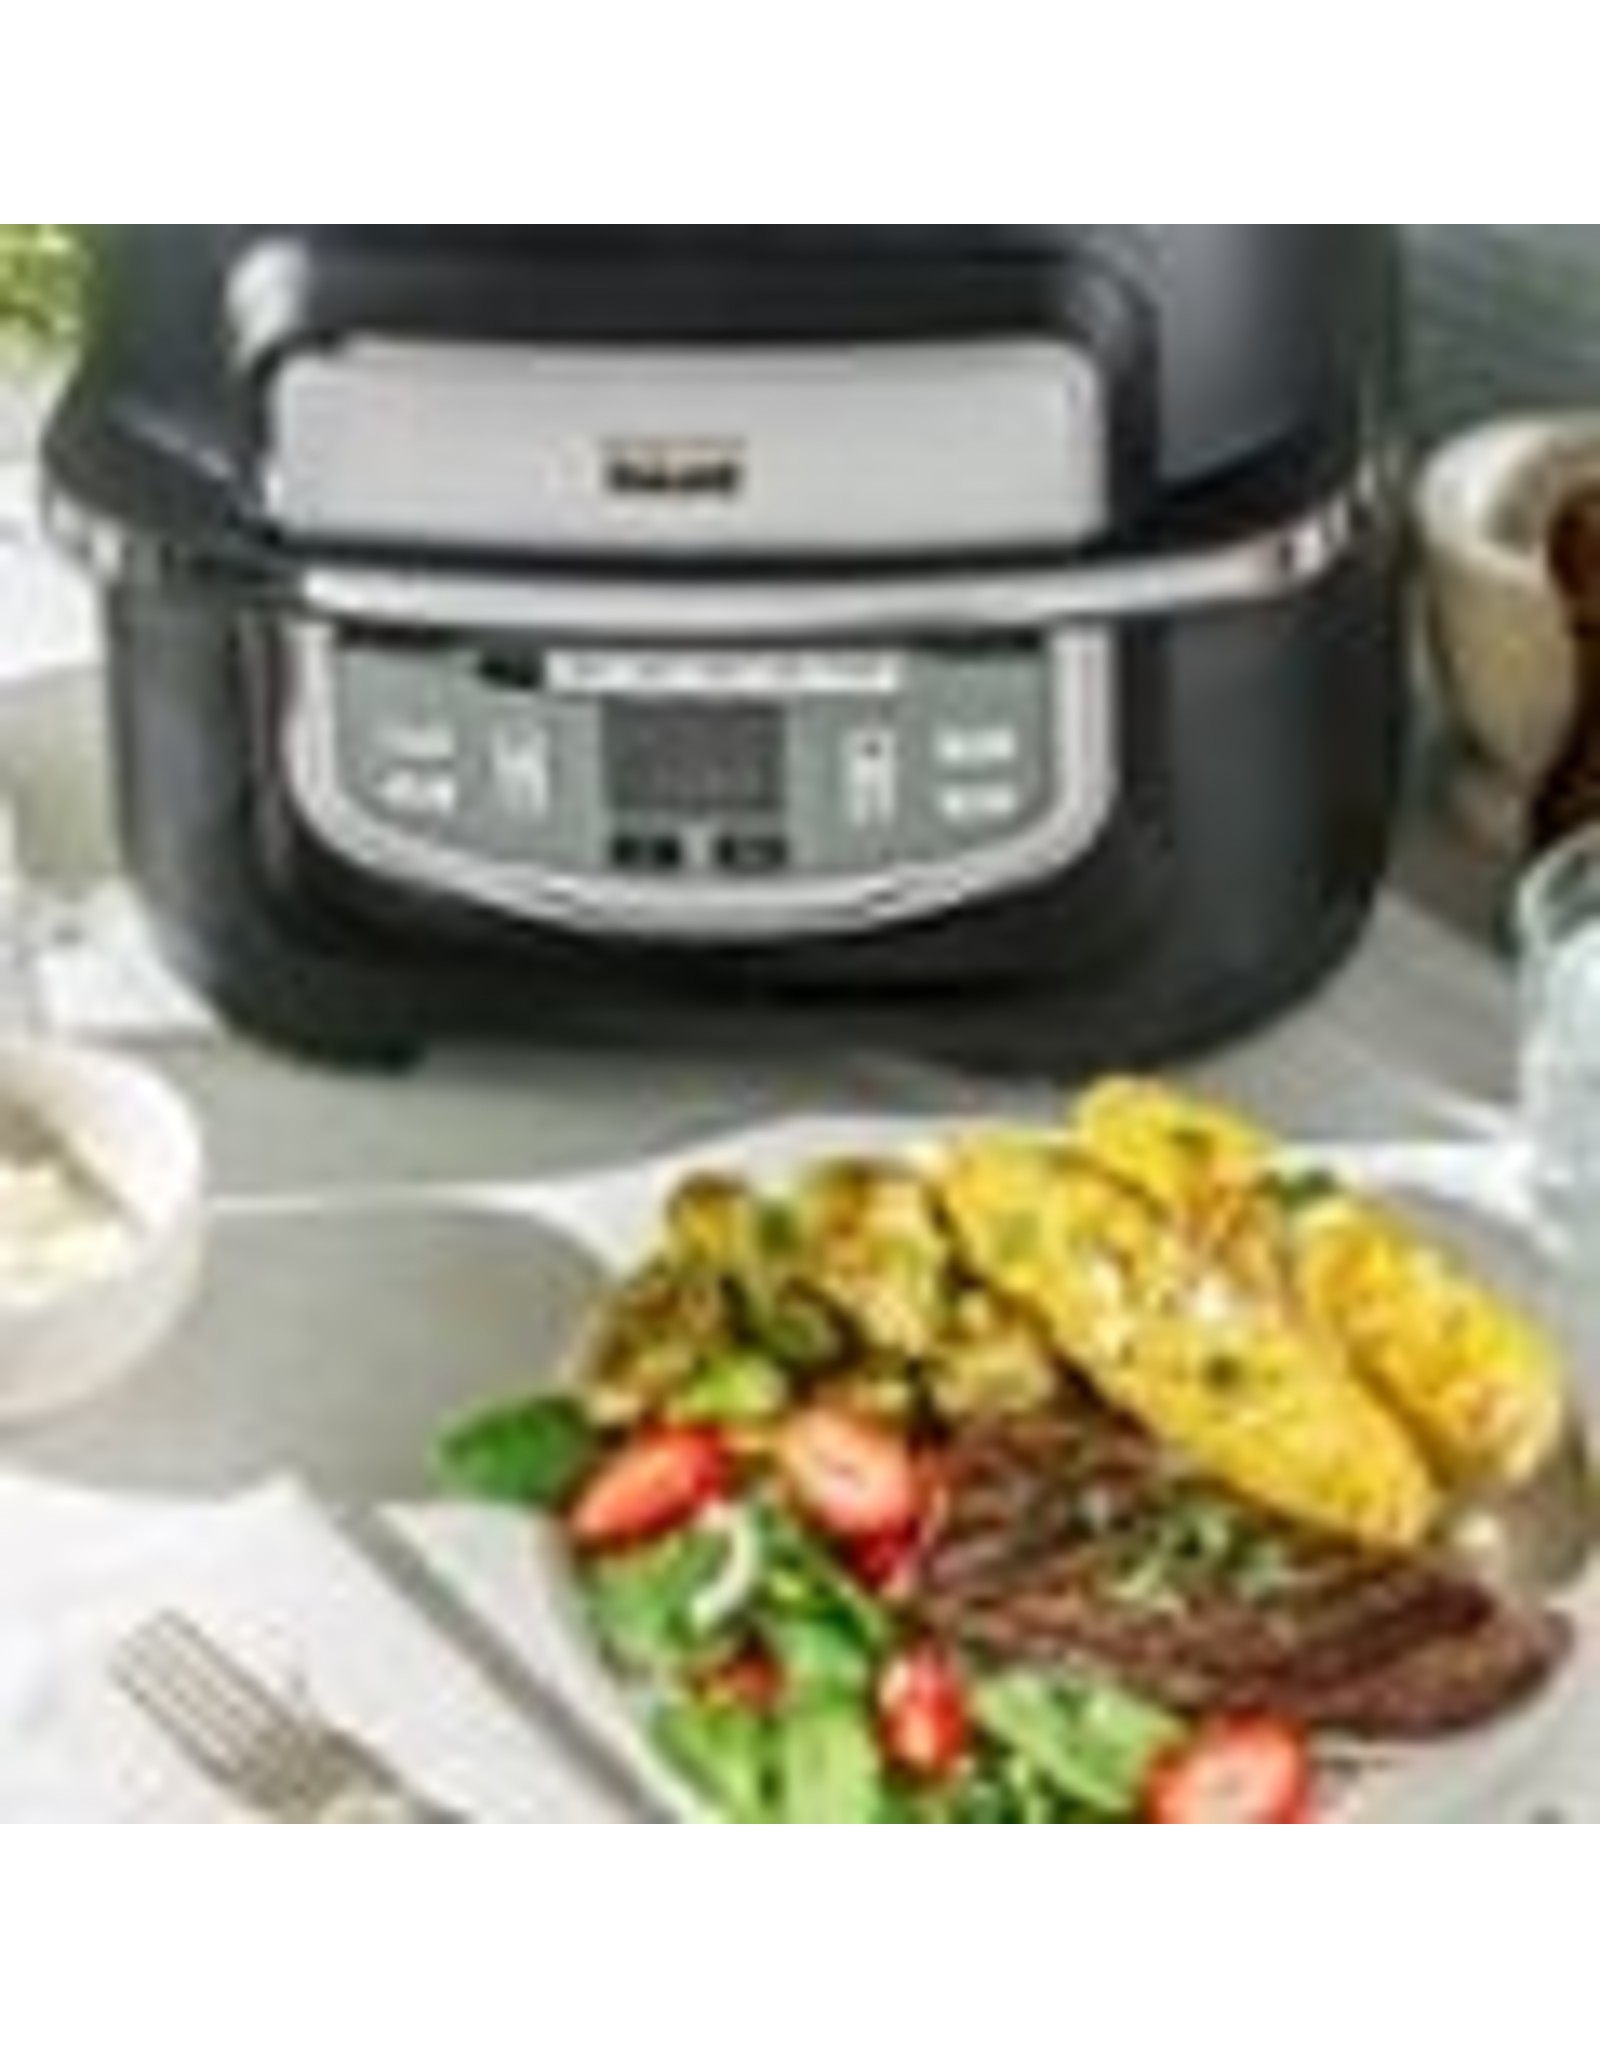 Best Buy: Bella Pro Series 9-in-1 Indoor Grill with 5.8-qt Air Fryer,  Roast, Broil, Bake, Sear, Sauté, Pizza & Dehydrate Matte Black 90100